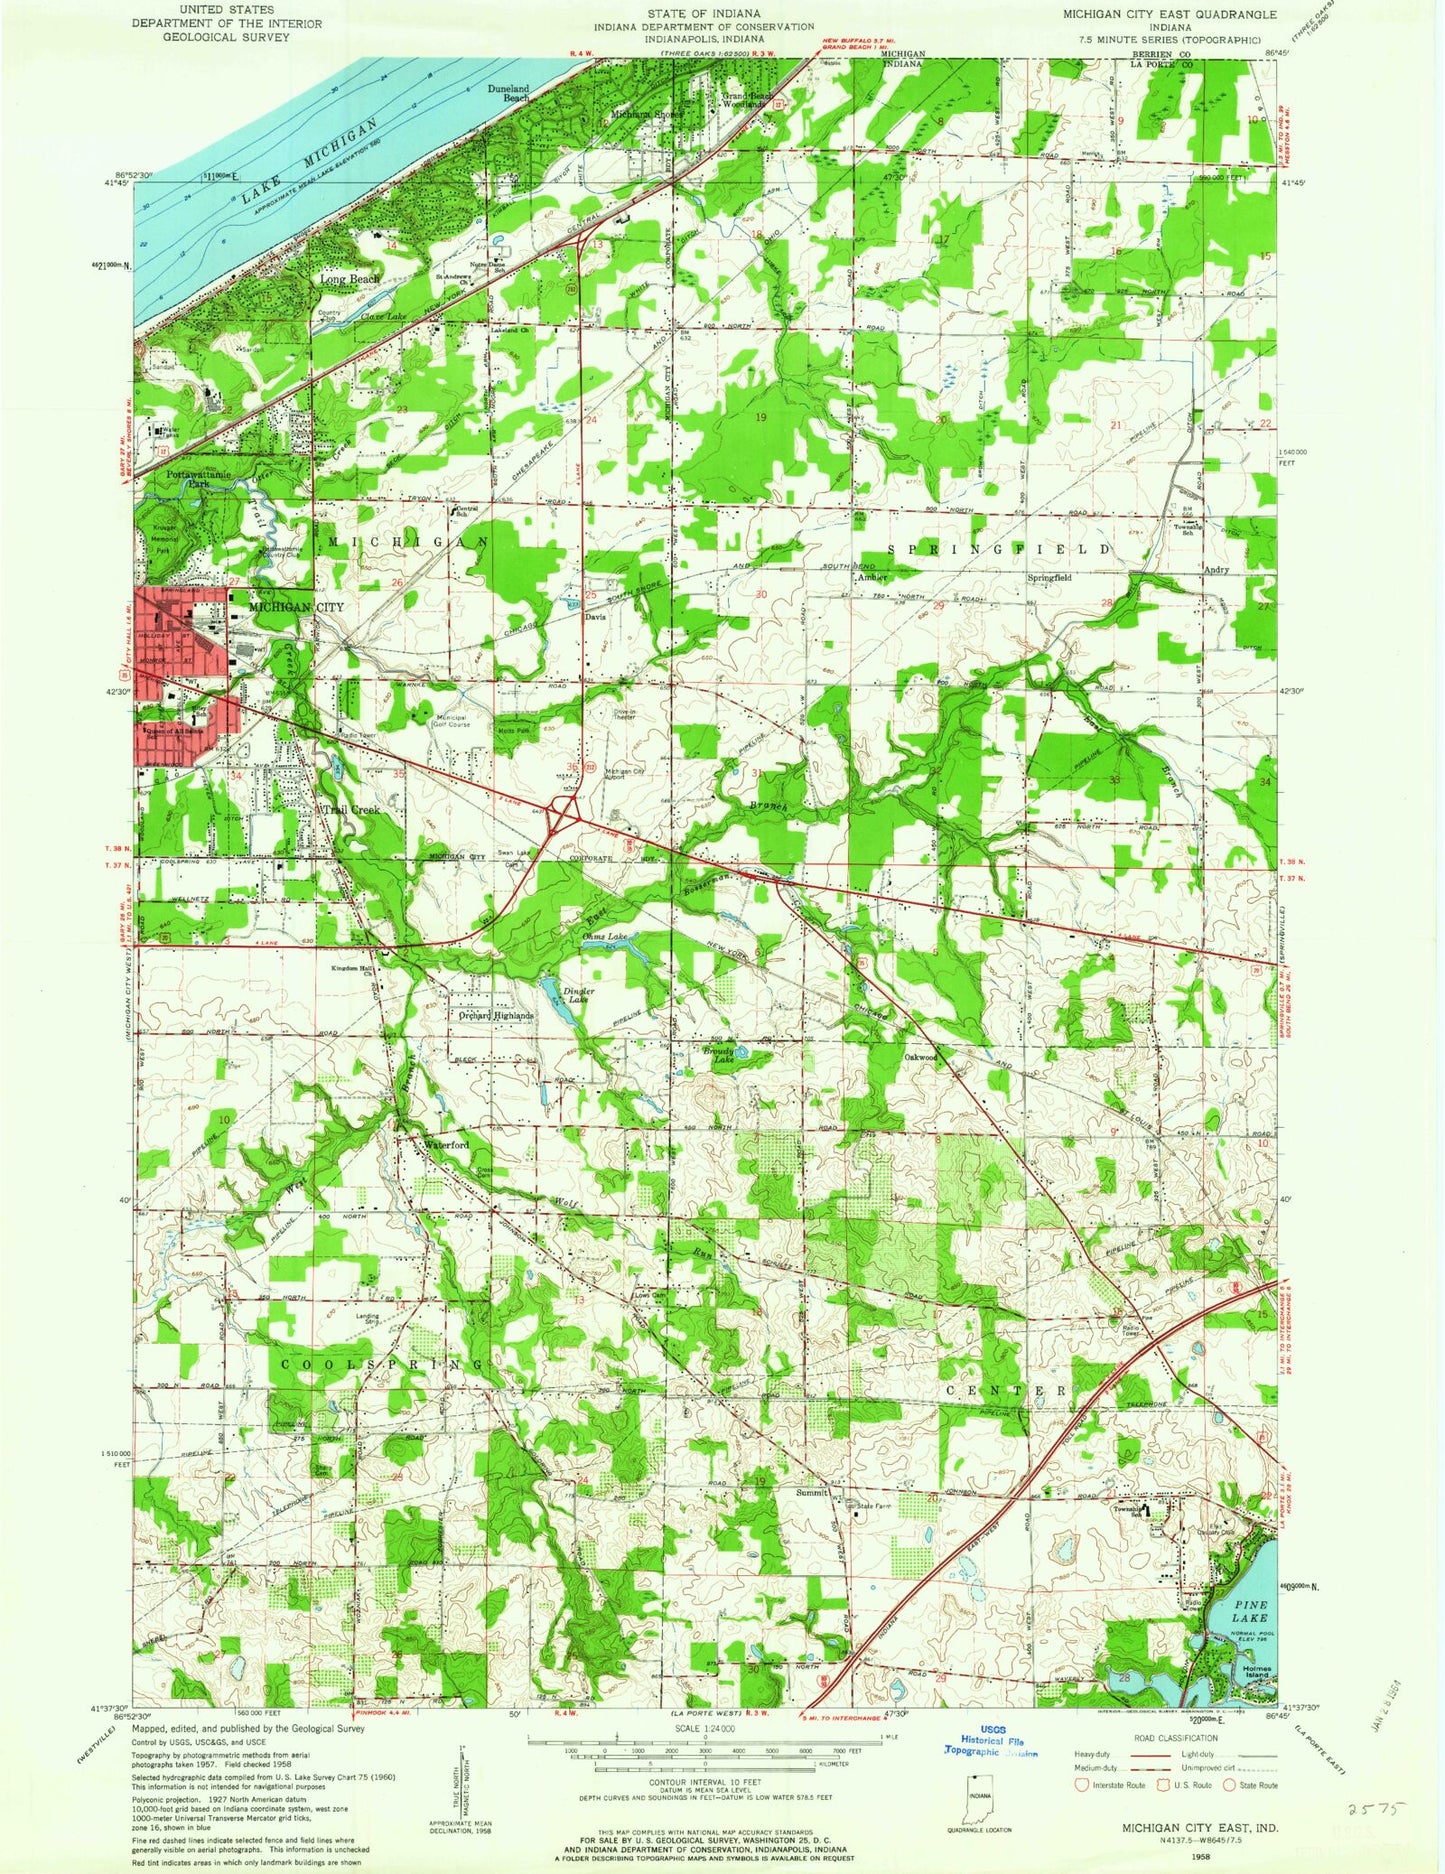 Classic USGS Michigan City East Indiana 7.5'x7.5' Topo Map Image